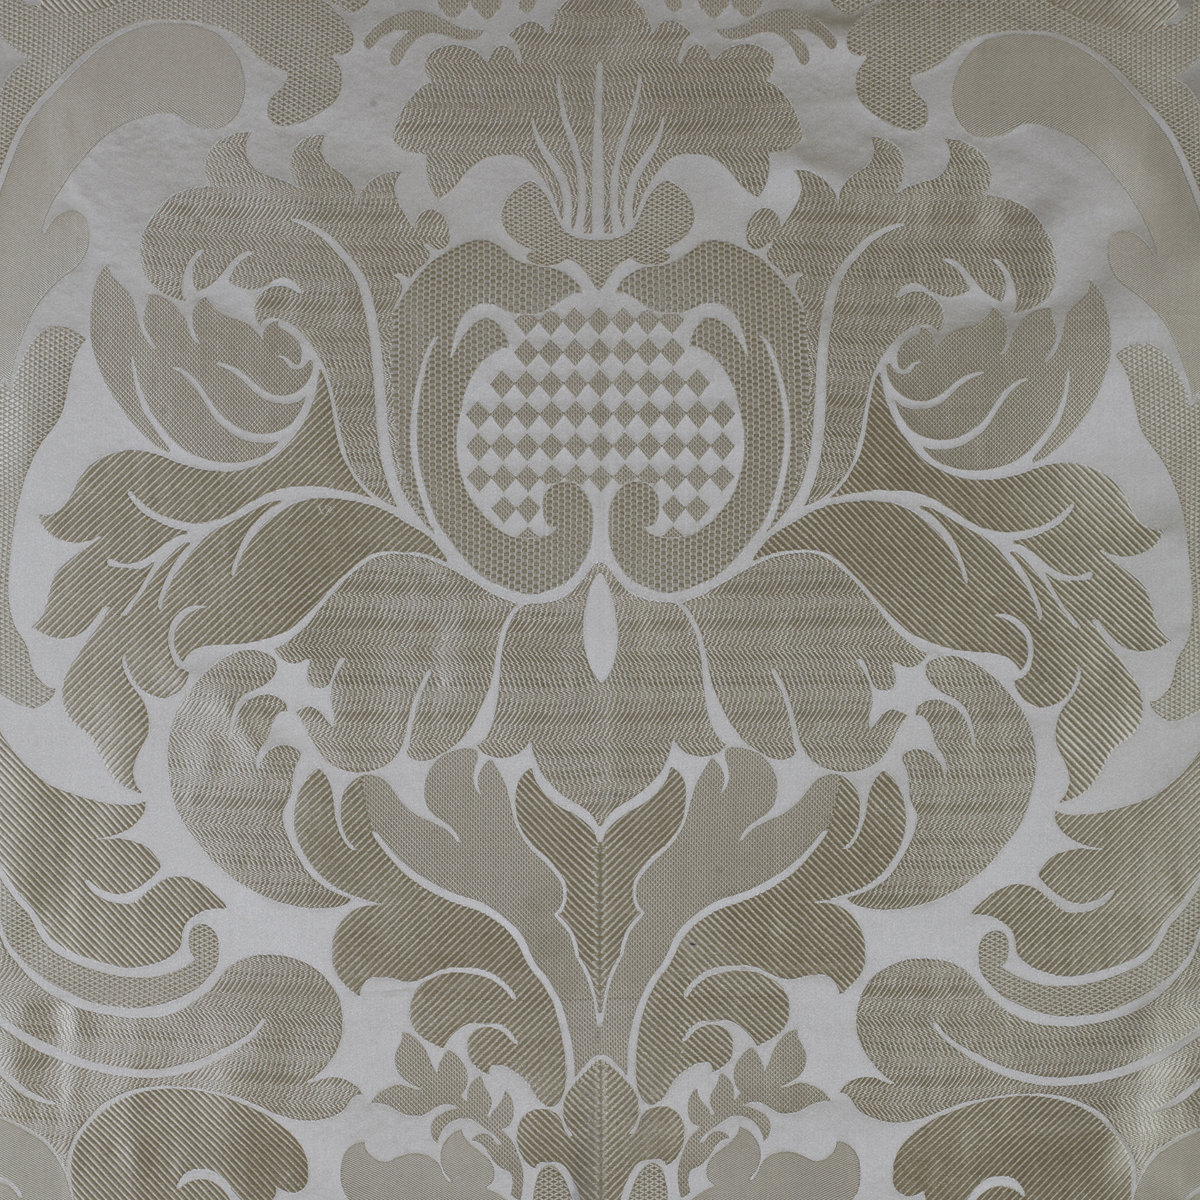 Home View All Colours Beige Large French Damask 1200x1200